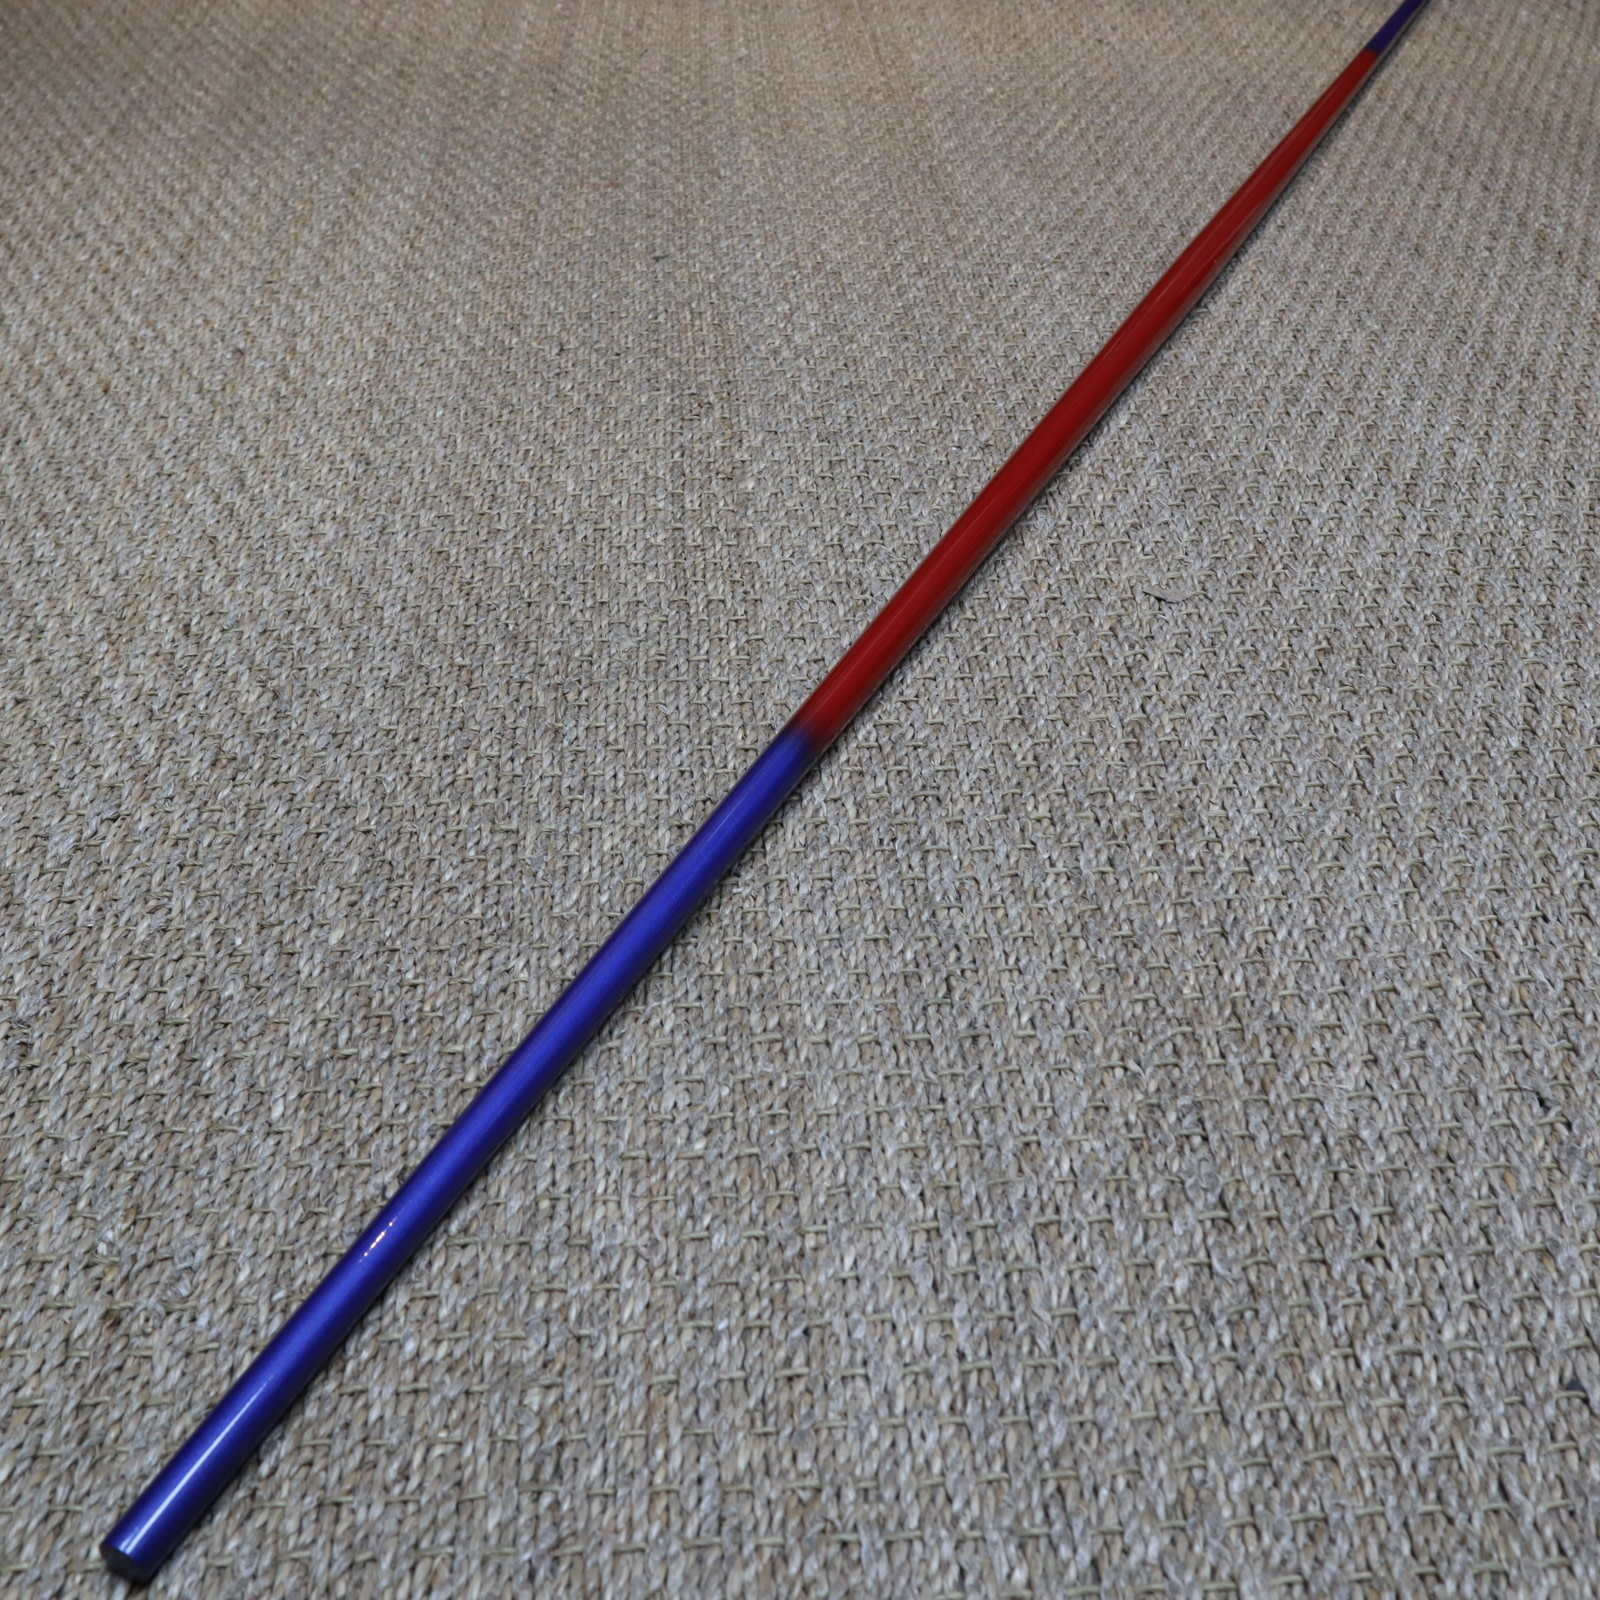 Red Blue Graphite Bo Staff is Lightweight and for Competition Forms ...